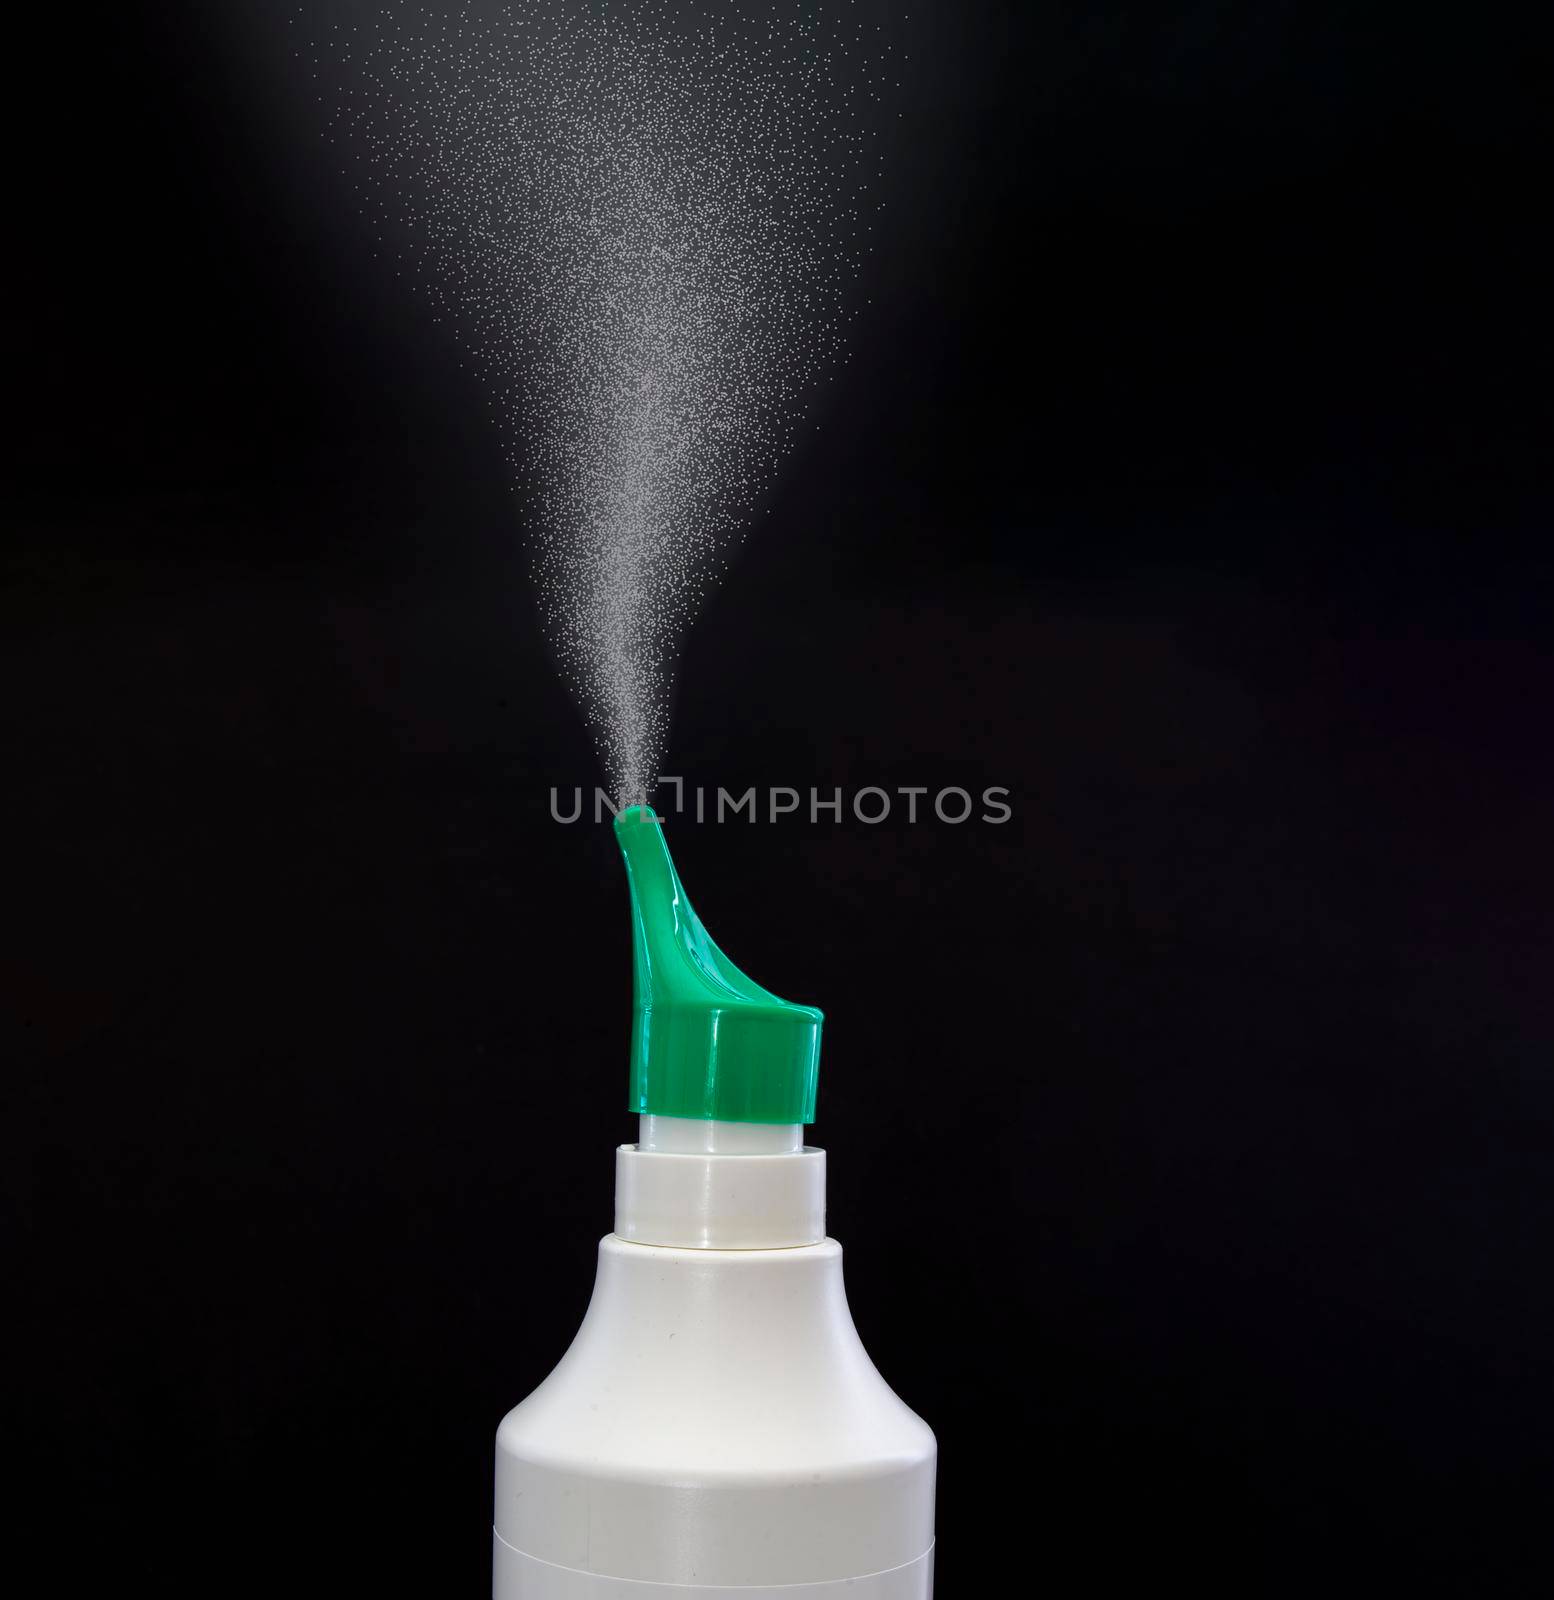 An adult nasal spray on a black background by oasisamuel